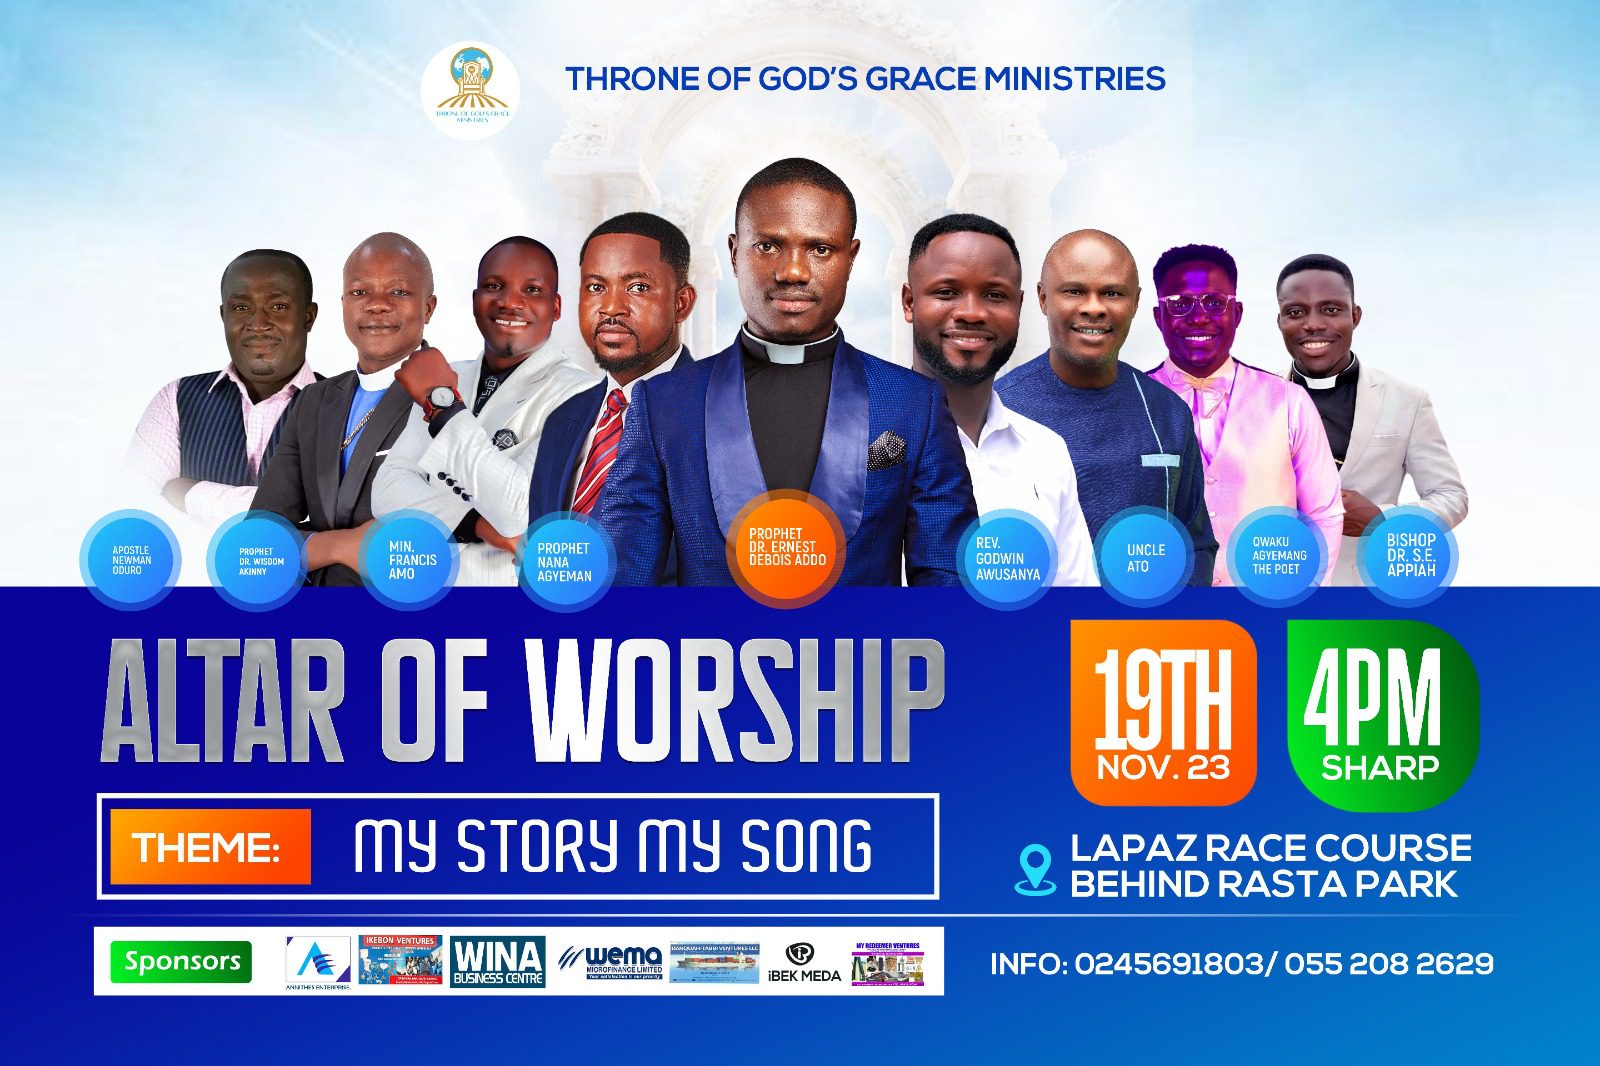 Throne of God's Grace Ministries Hosts "My Story My Song" Worship Experience